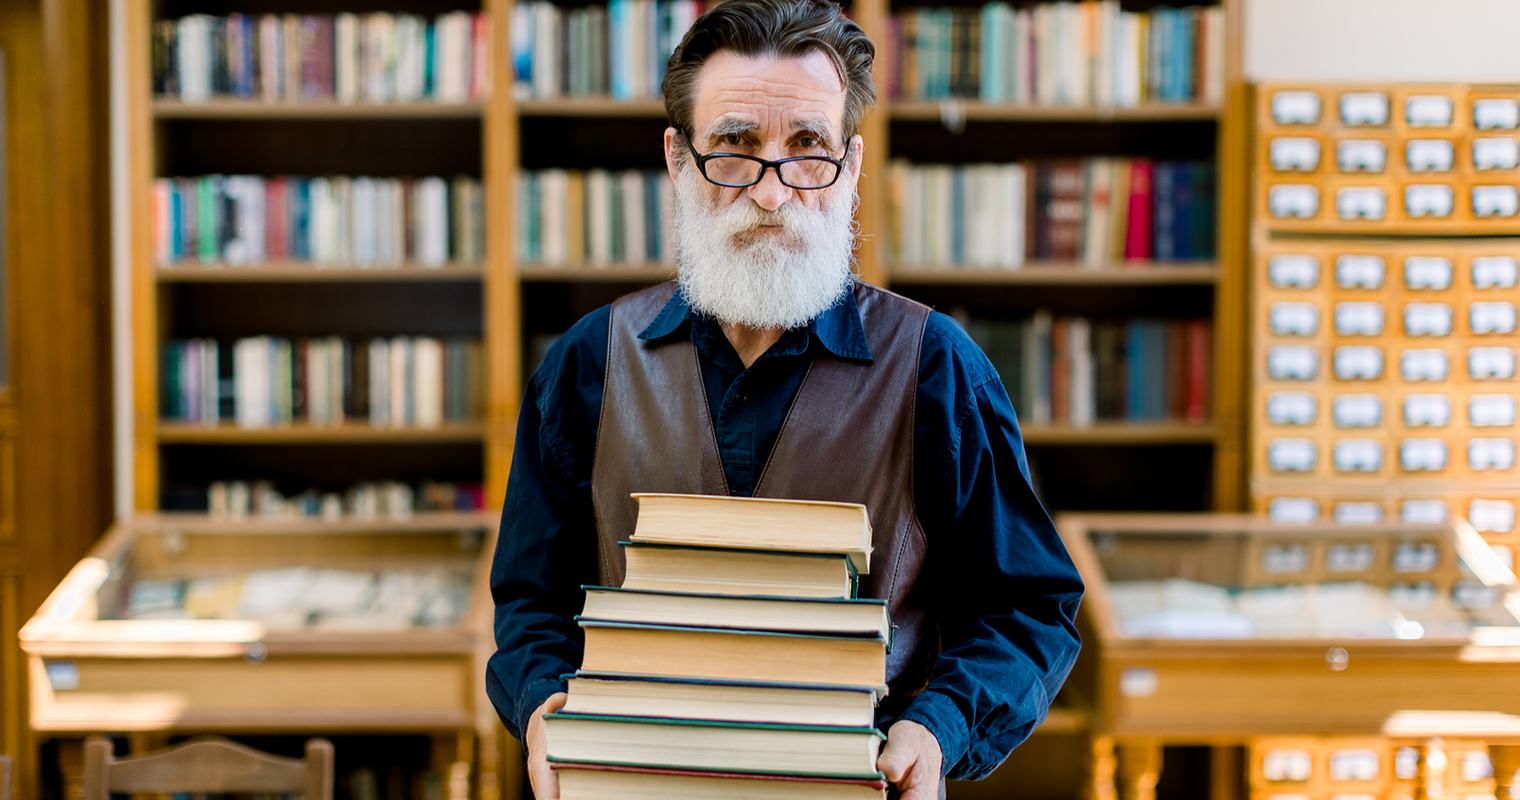 Google Is a Librarian: Teaching SEO to Non-Specialists